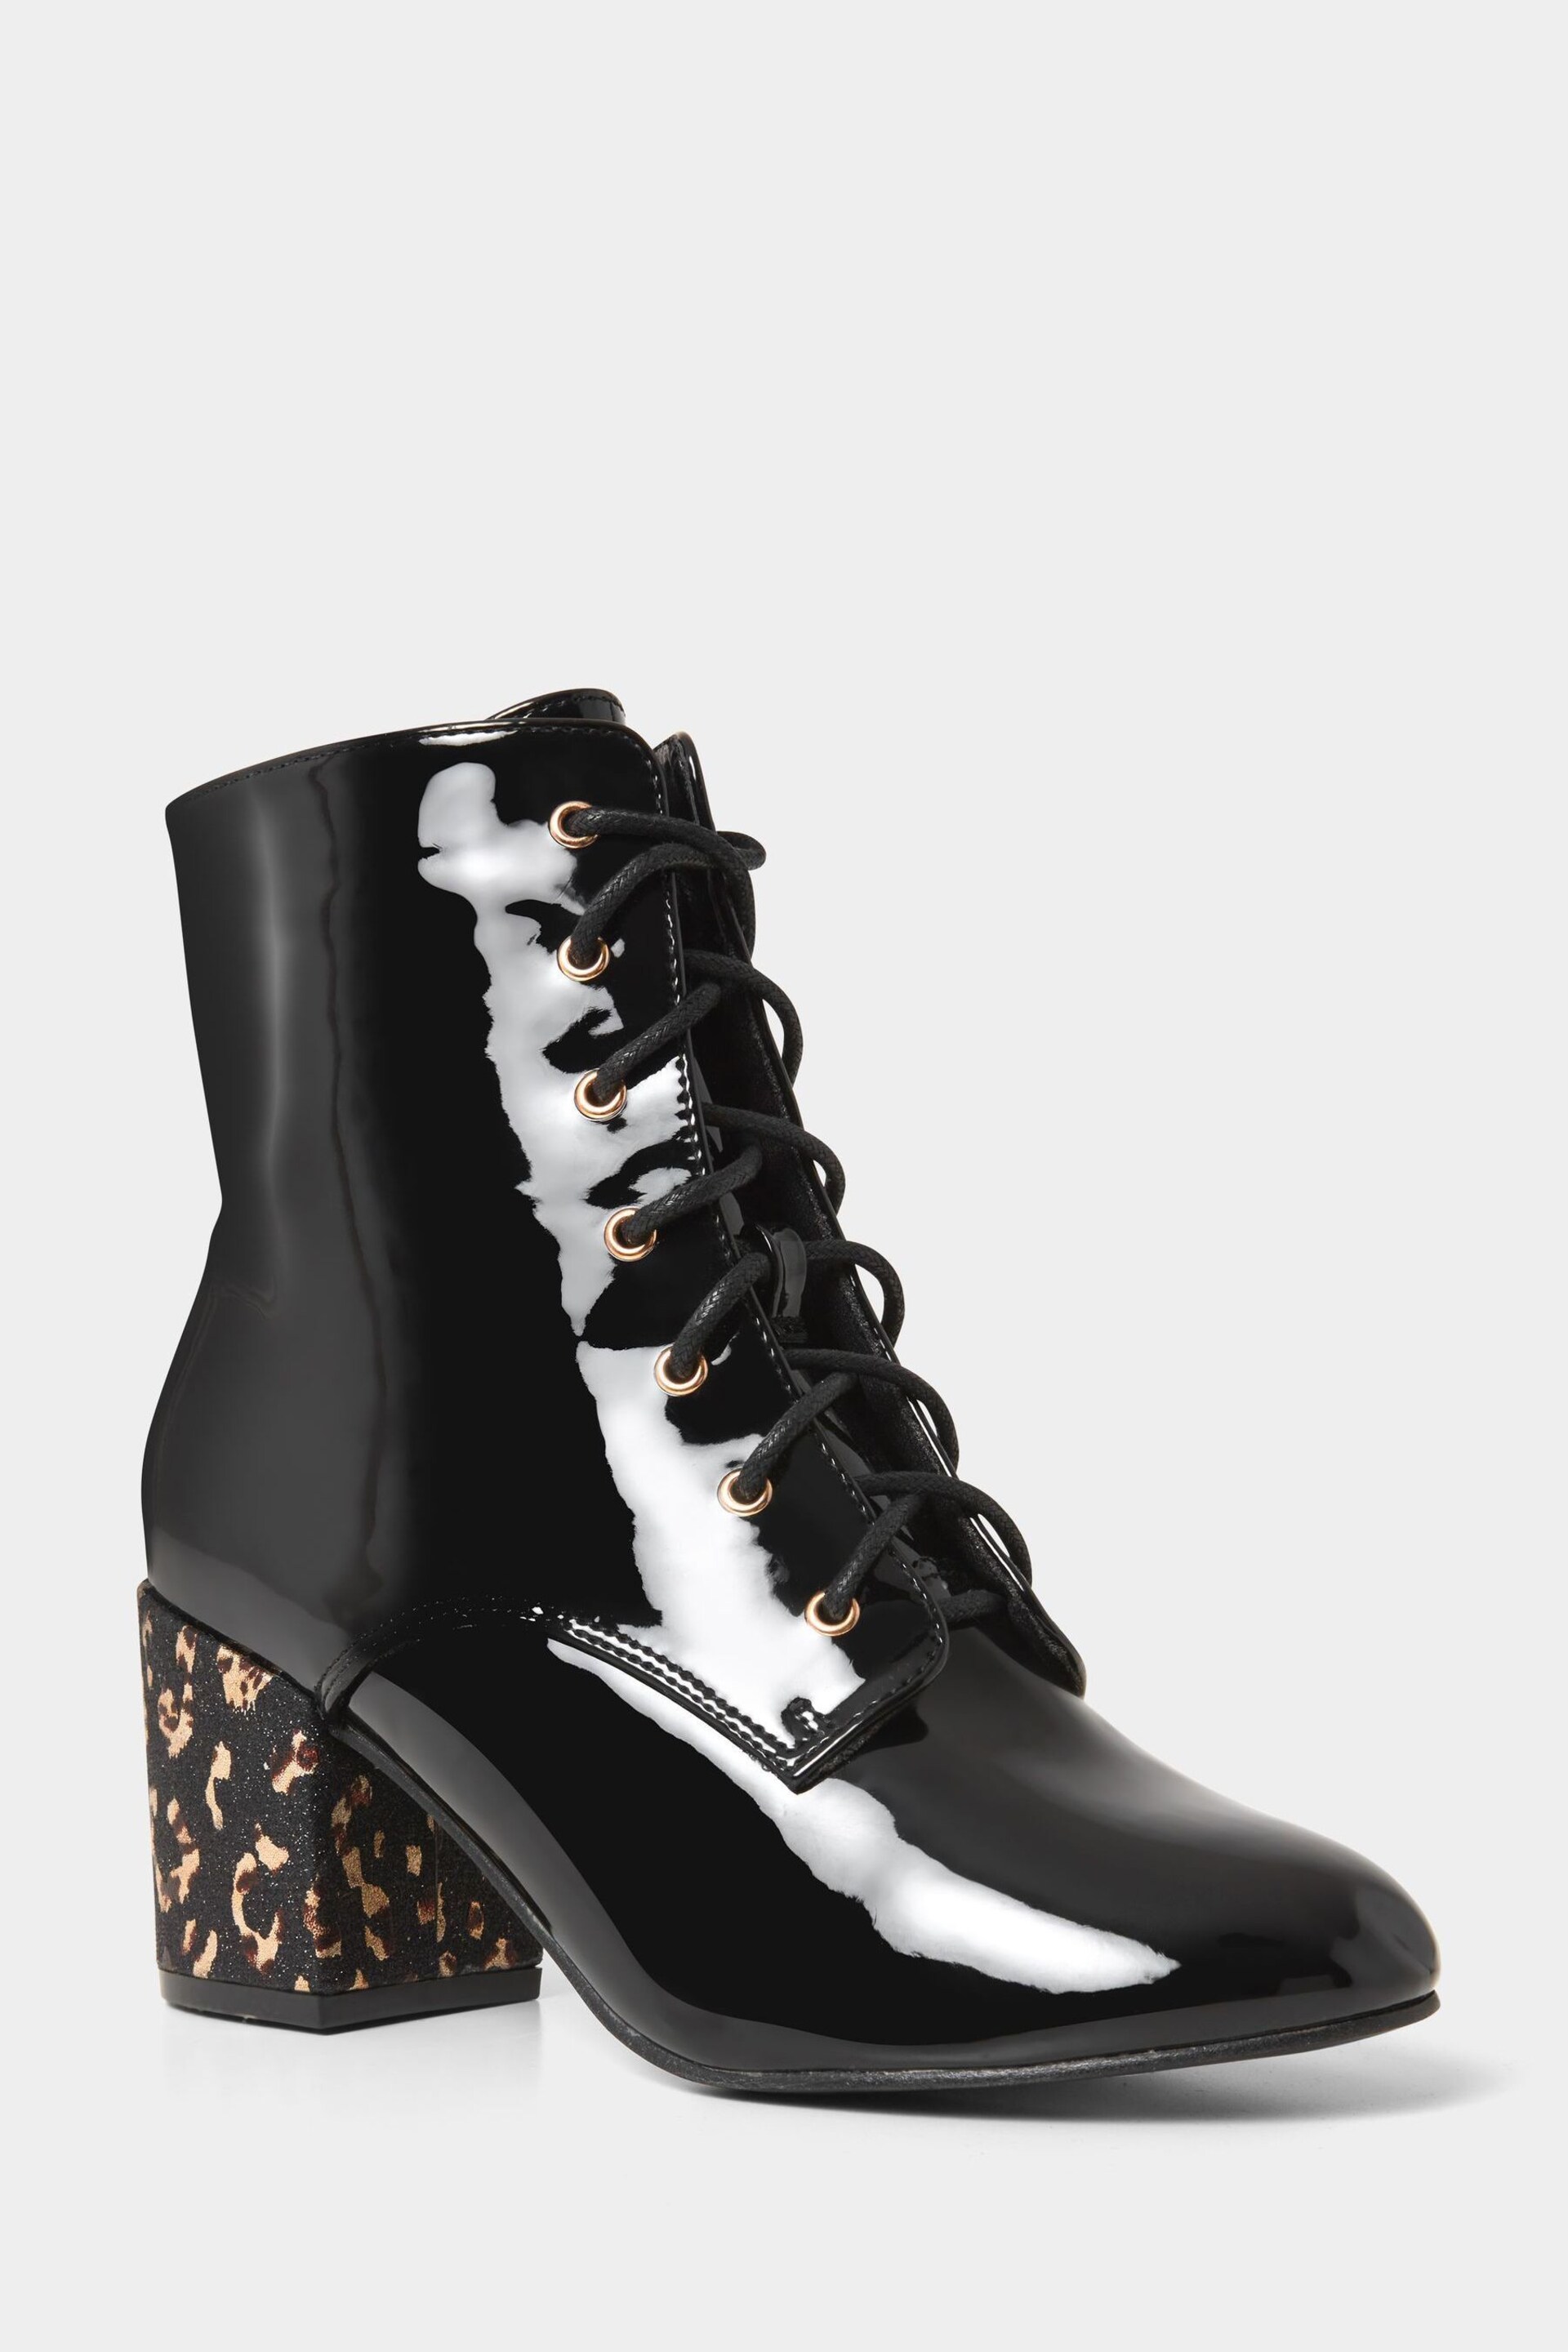 Joe Browns Black Wonderful Patent Ankle Boots - Image 2 of 5